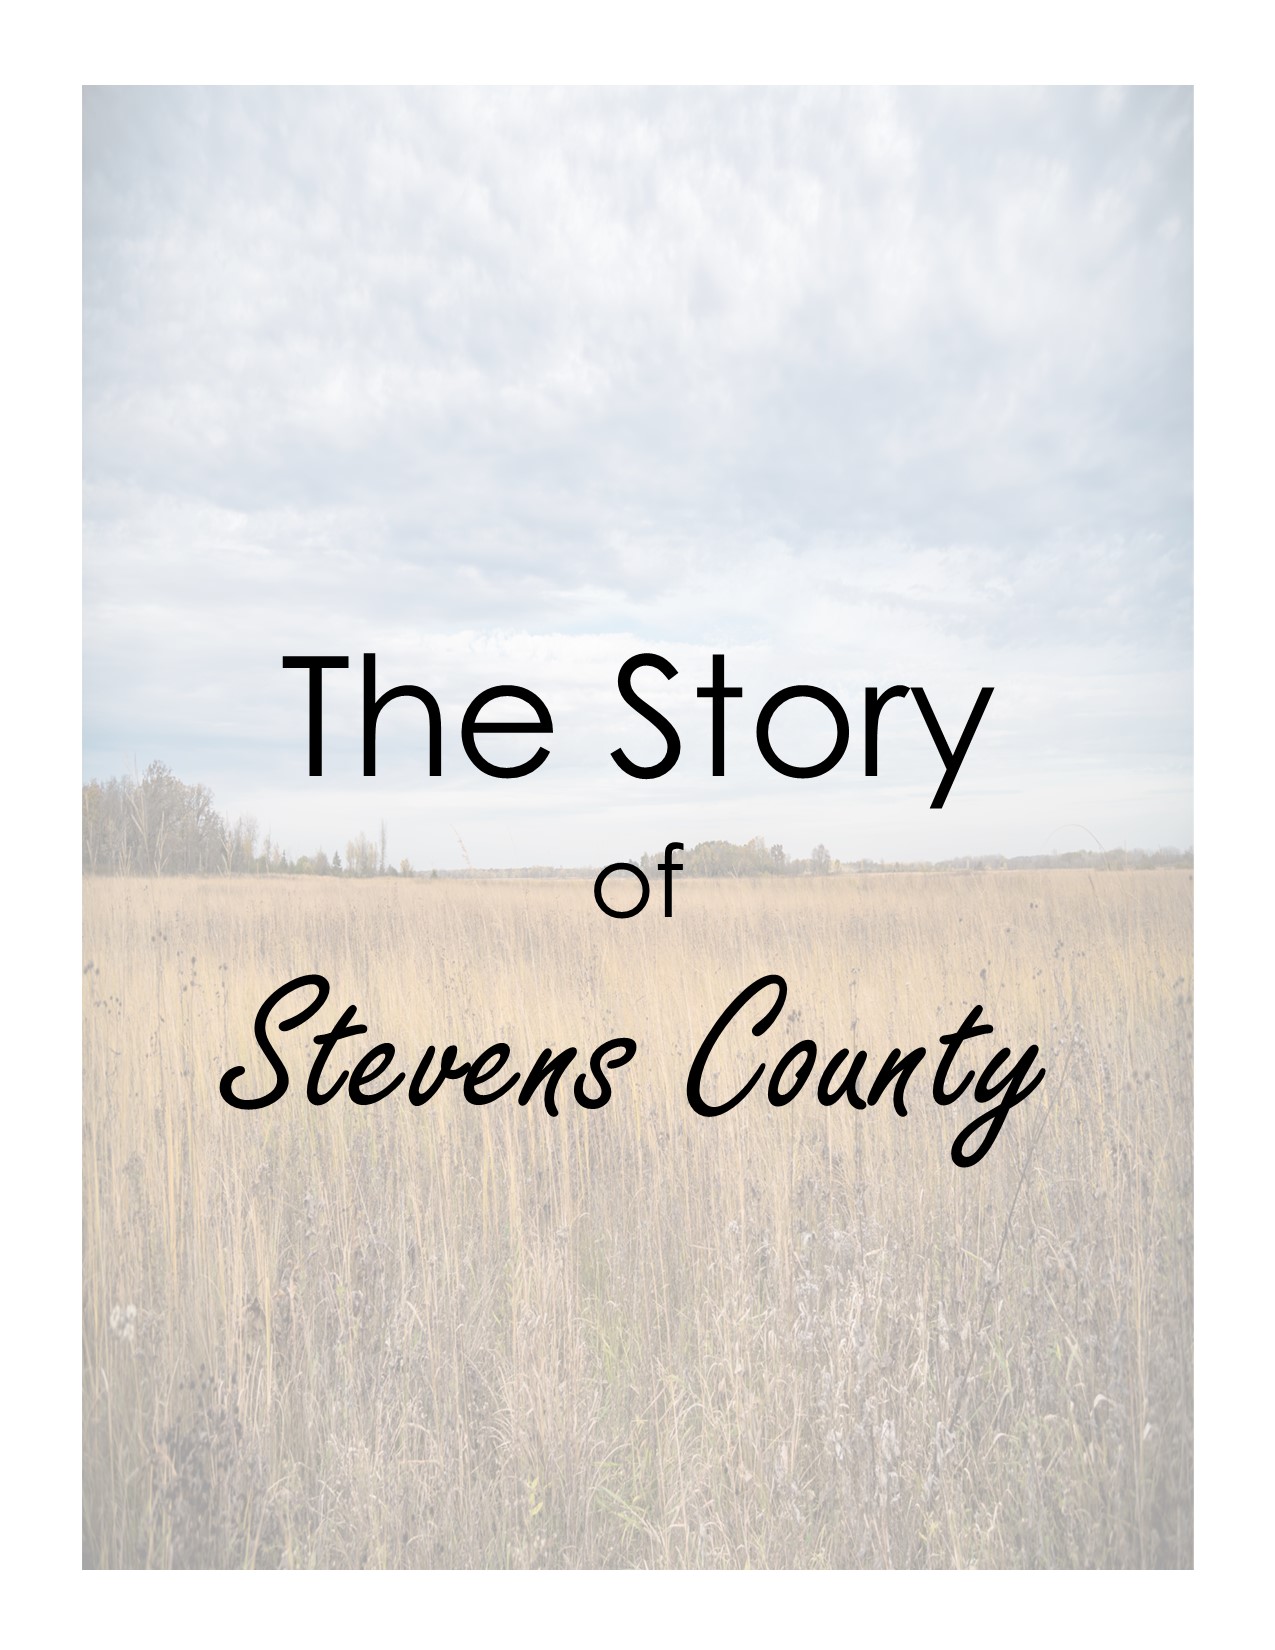 The Story of Stevens County